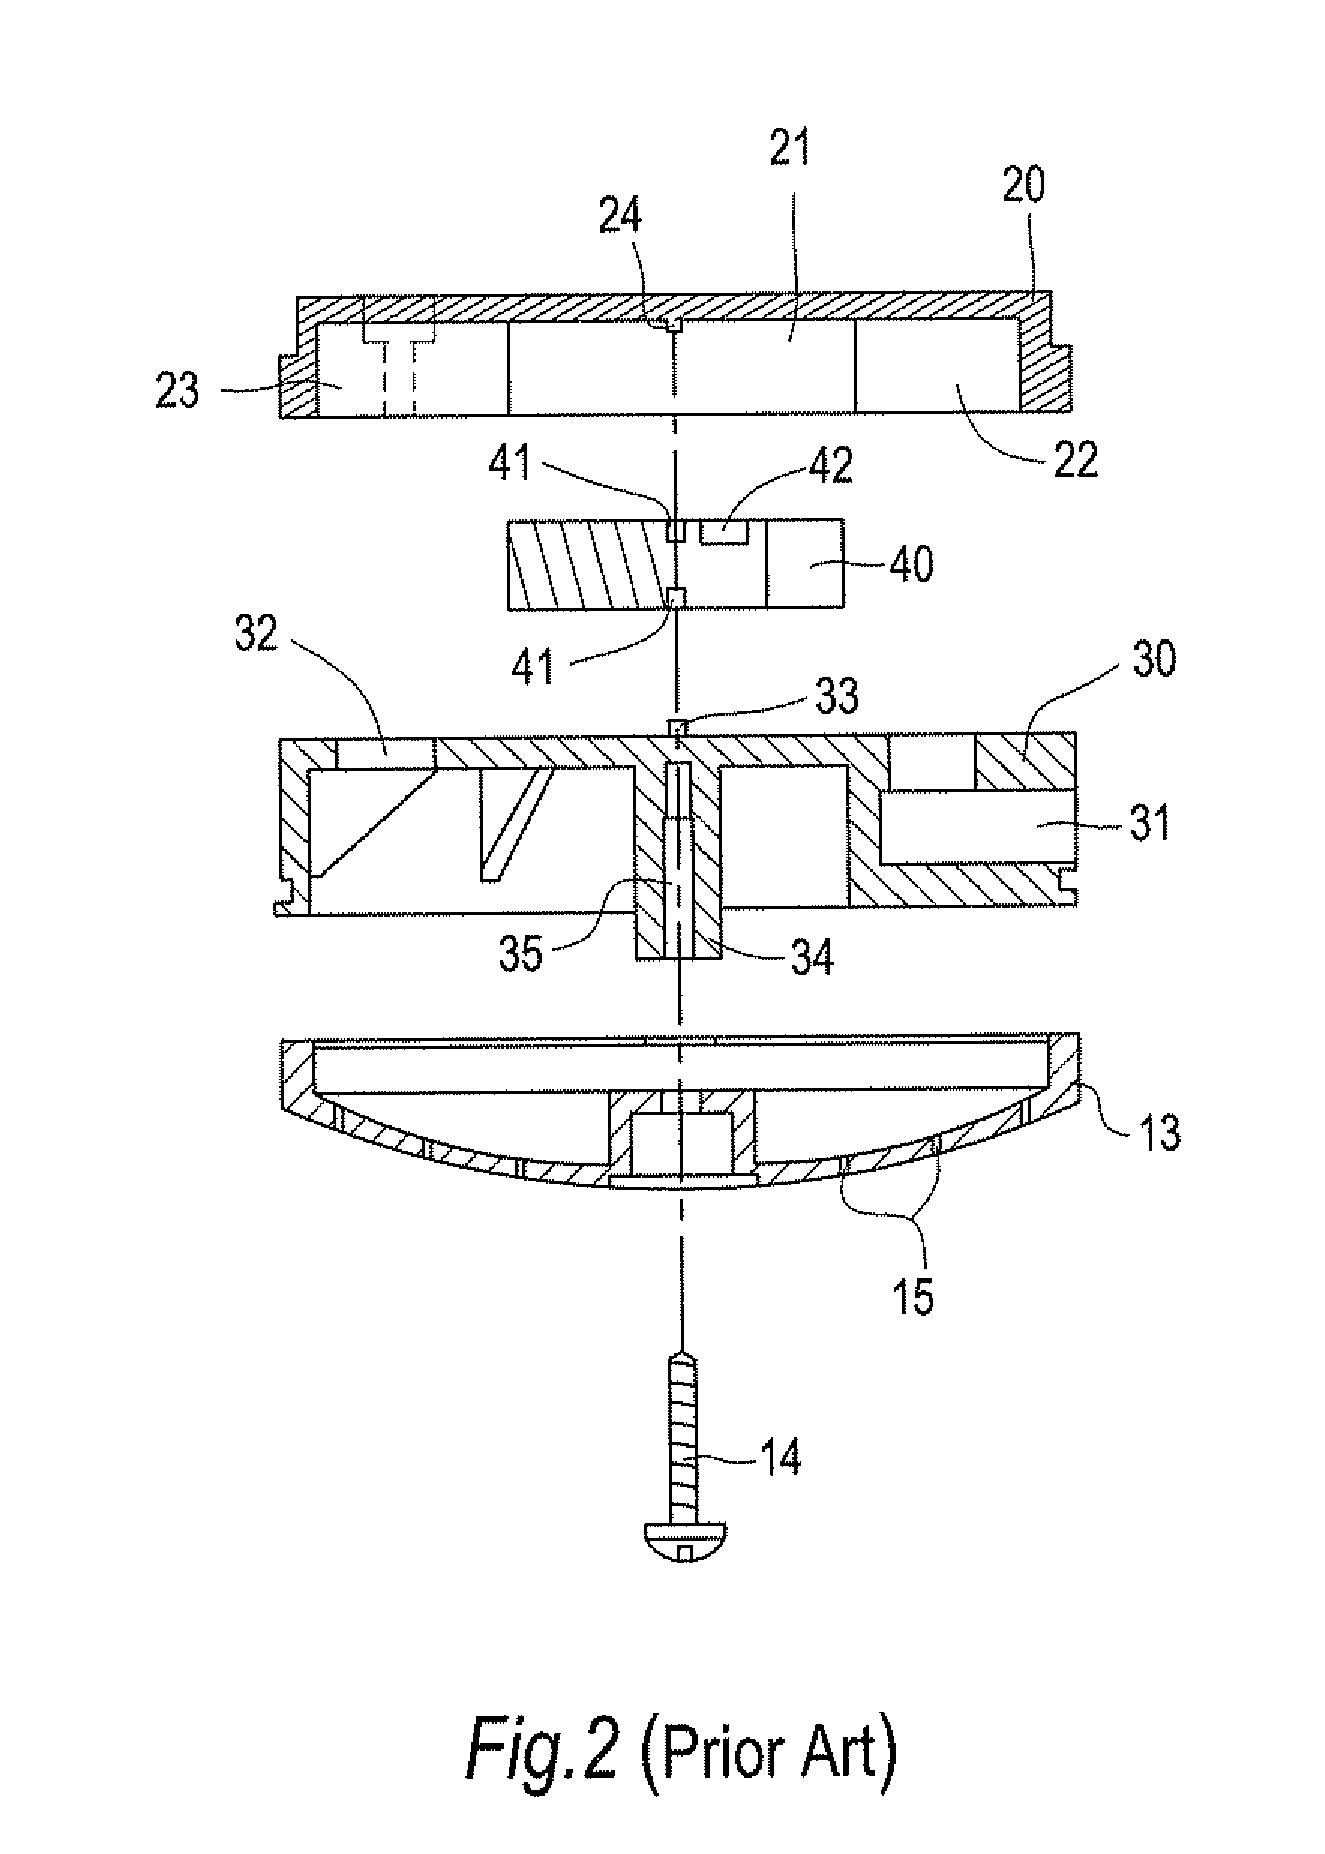 Hand Held Shower Head With Filter Replacing Pre-Alarm Device